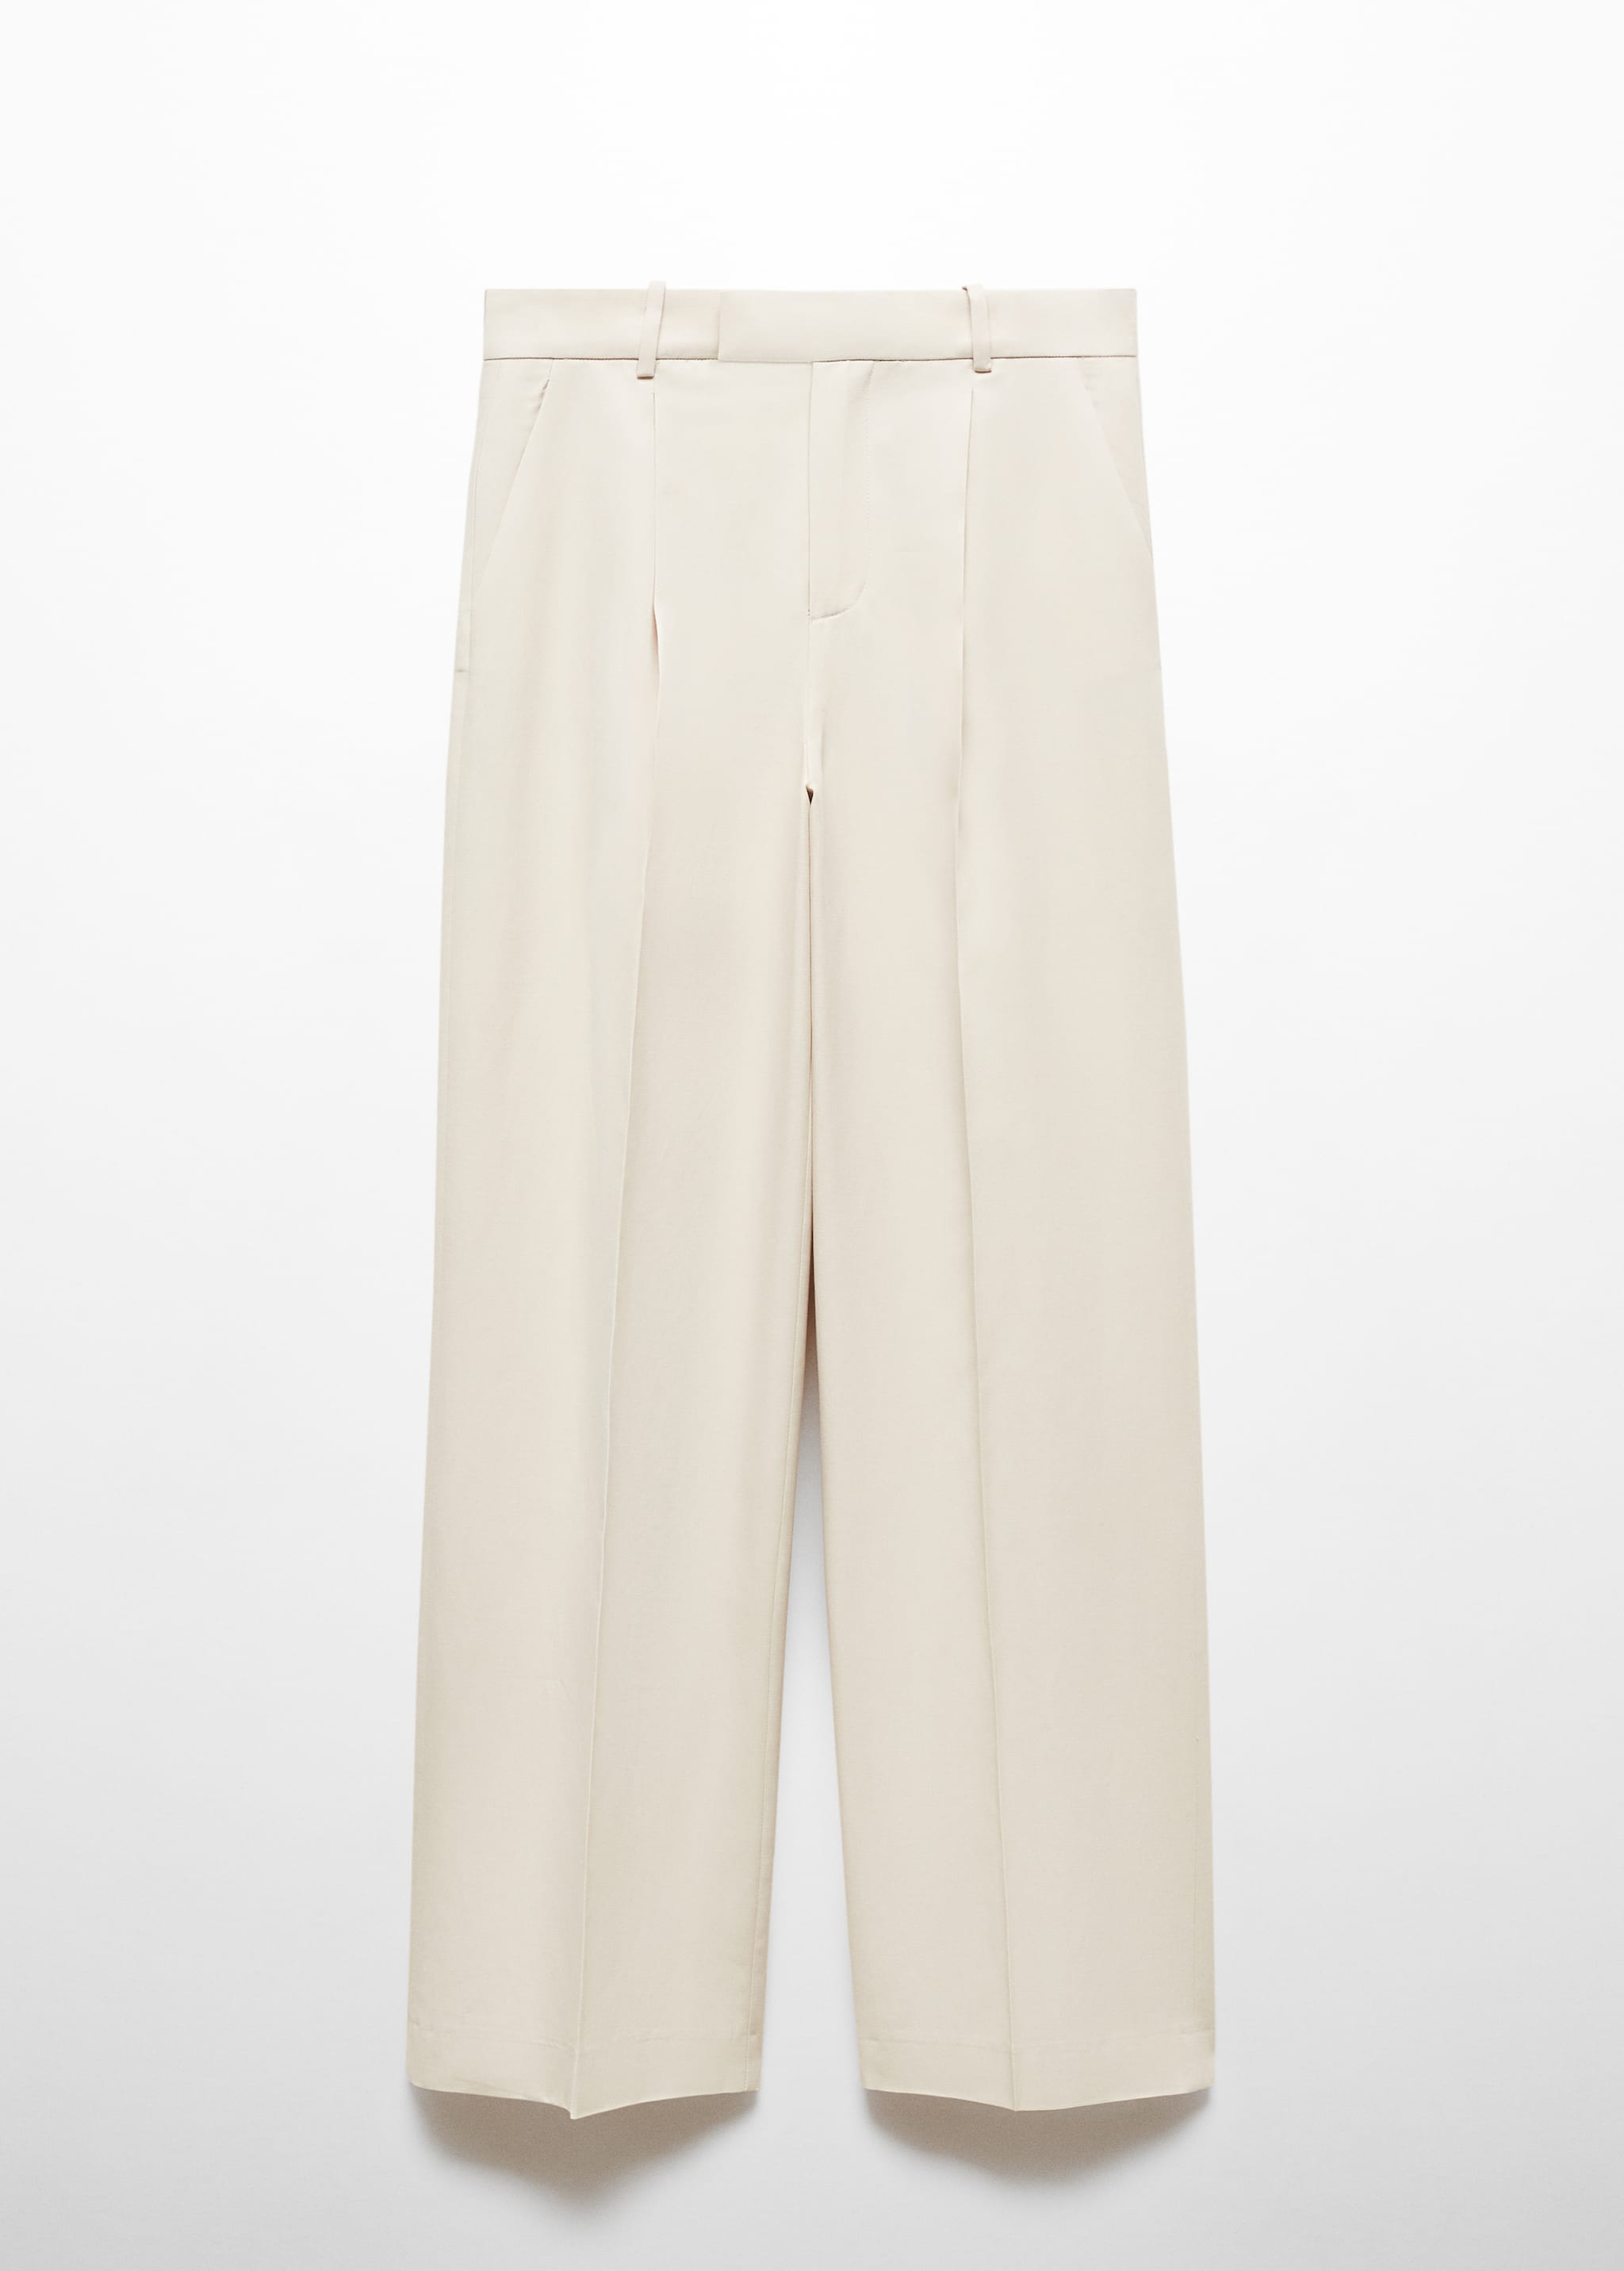 Pleated suit trousers - Article without model